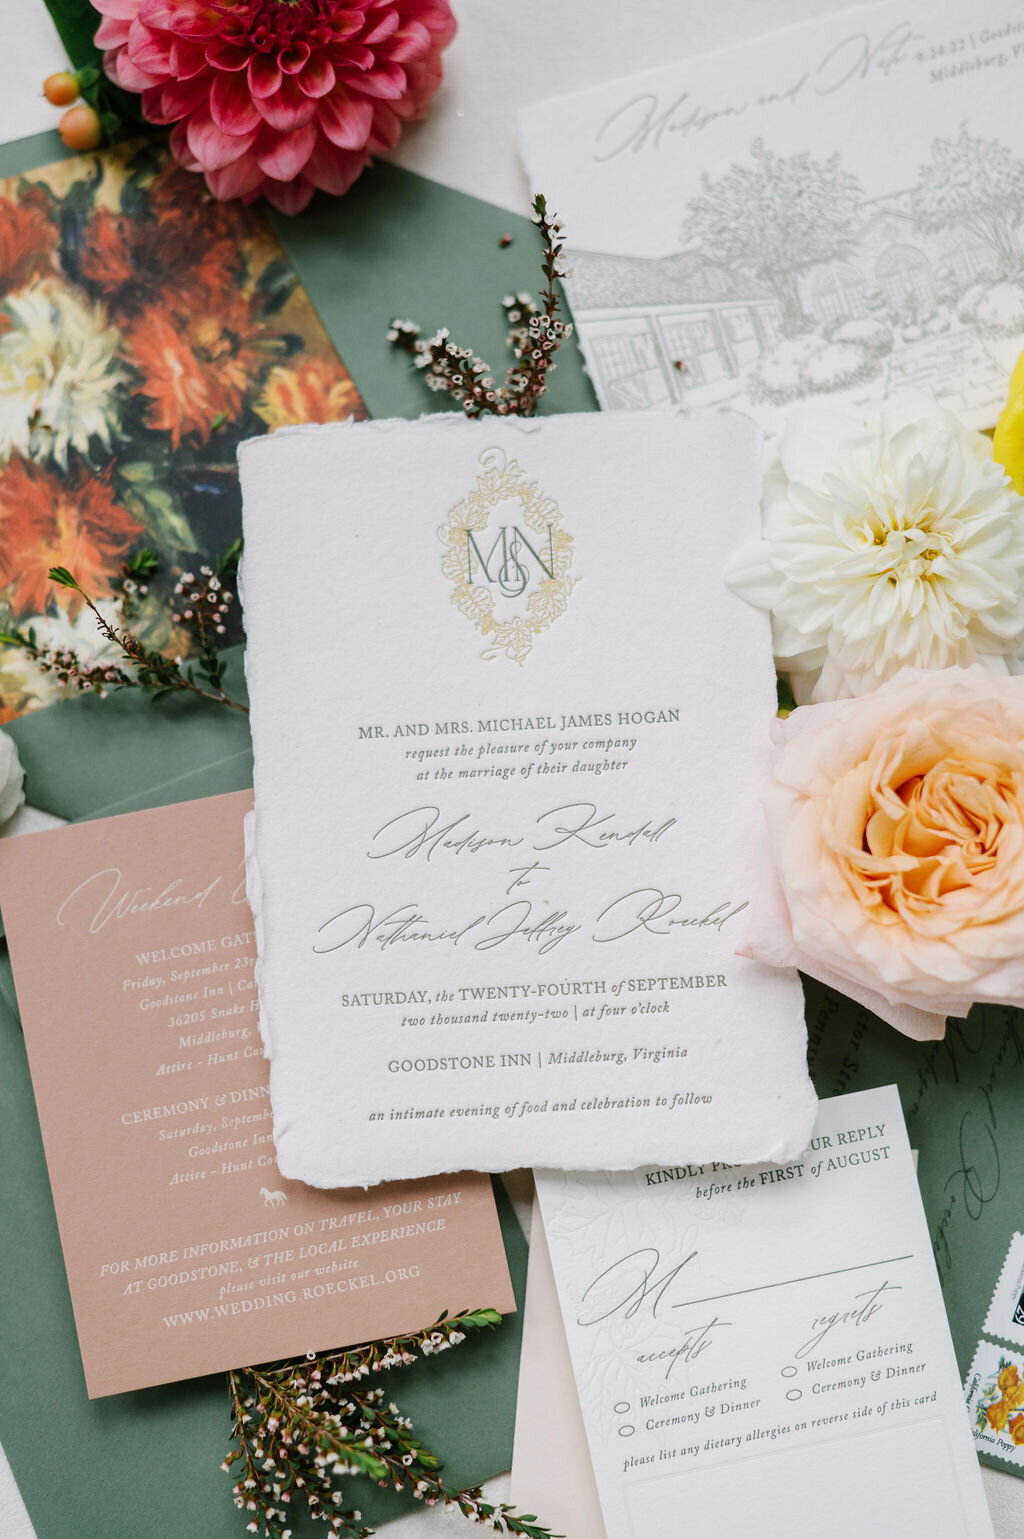 Wedding details photo with floral details